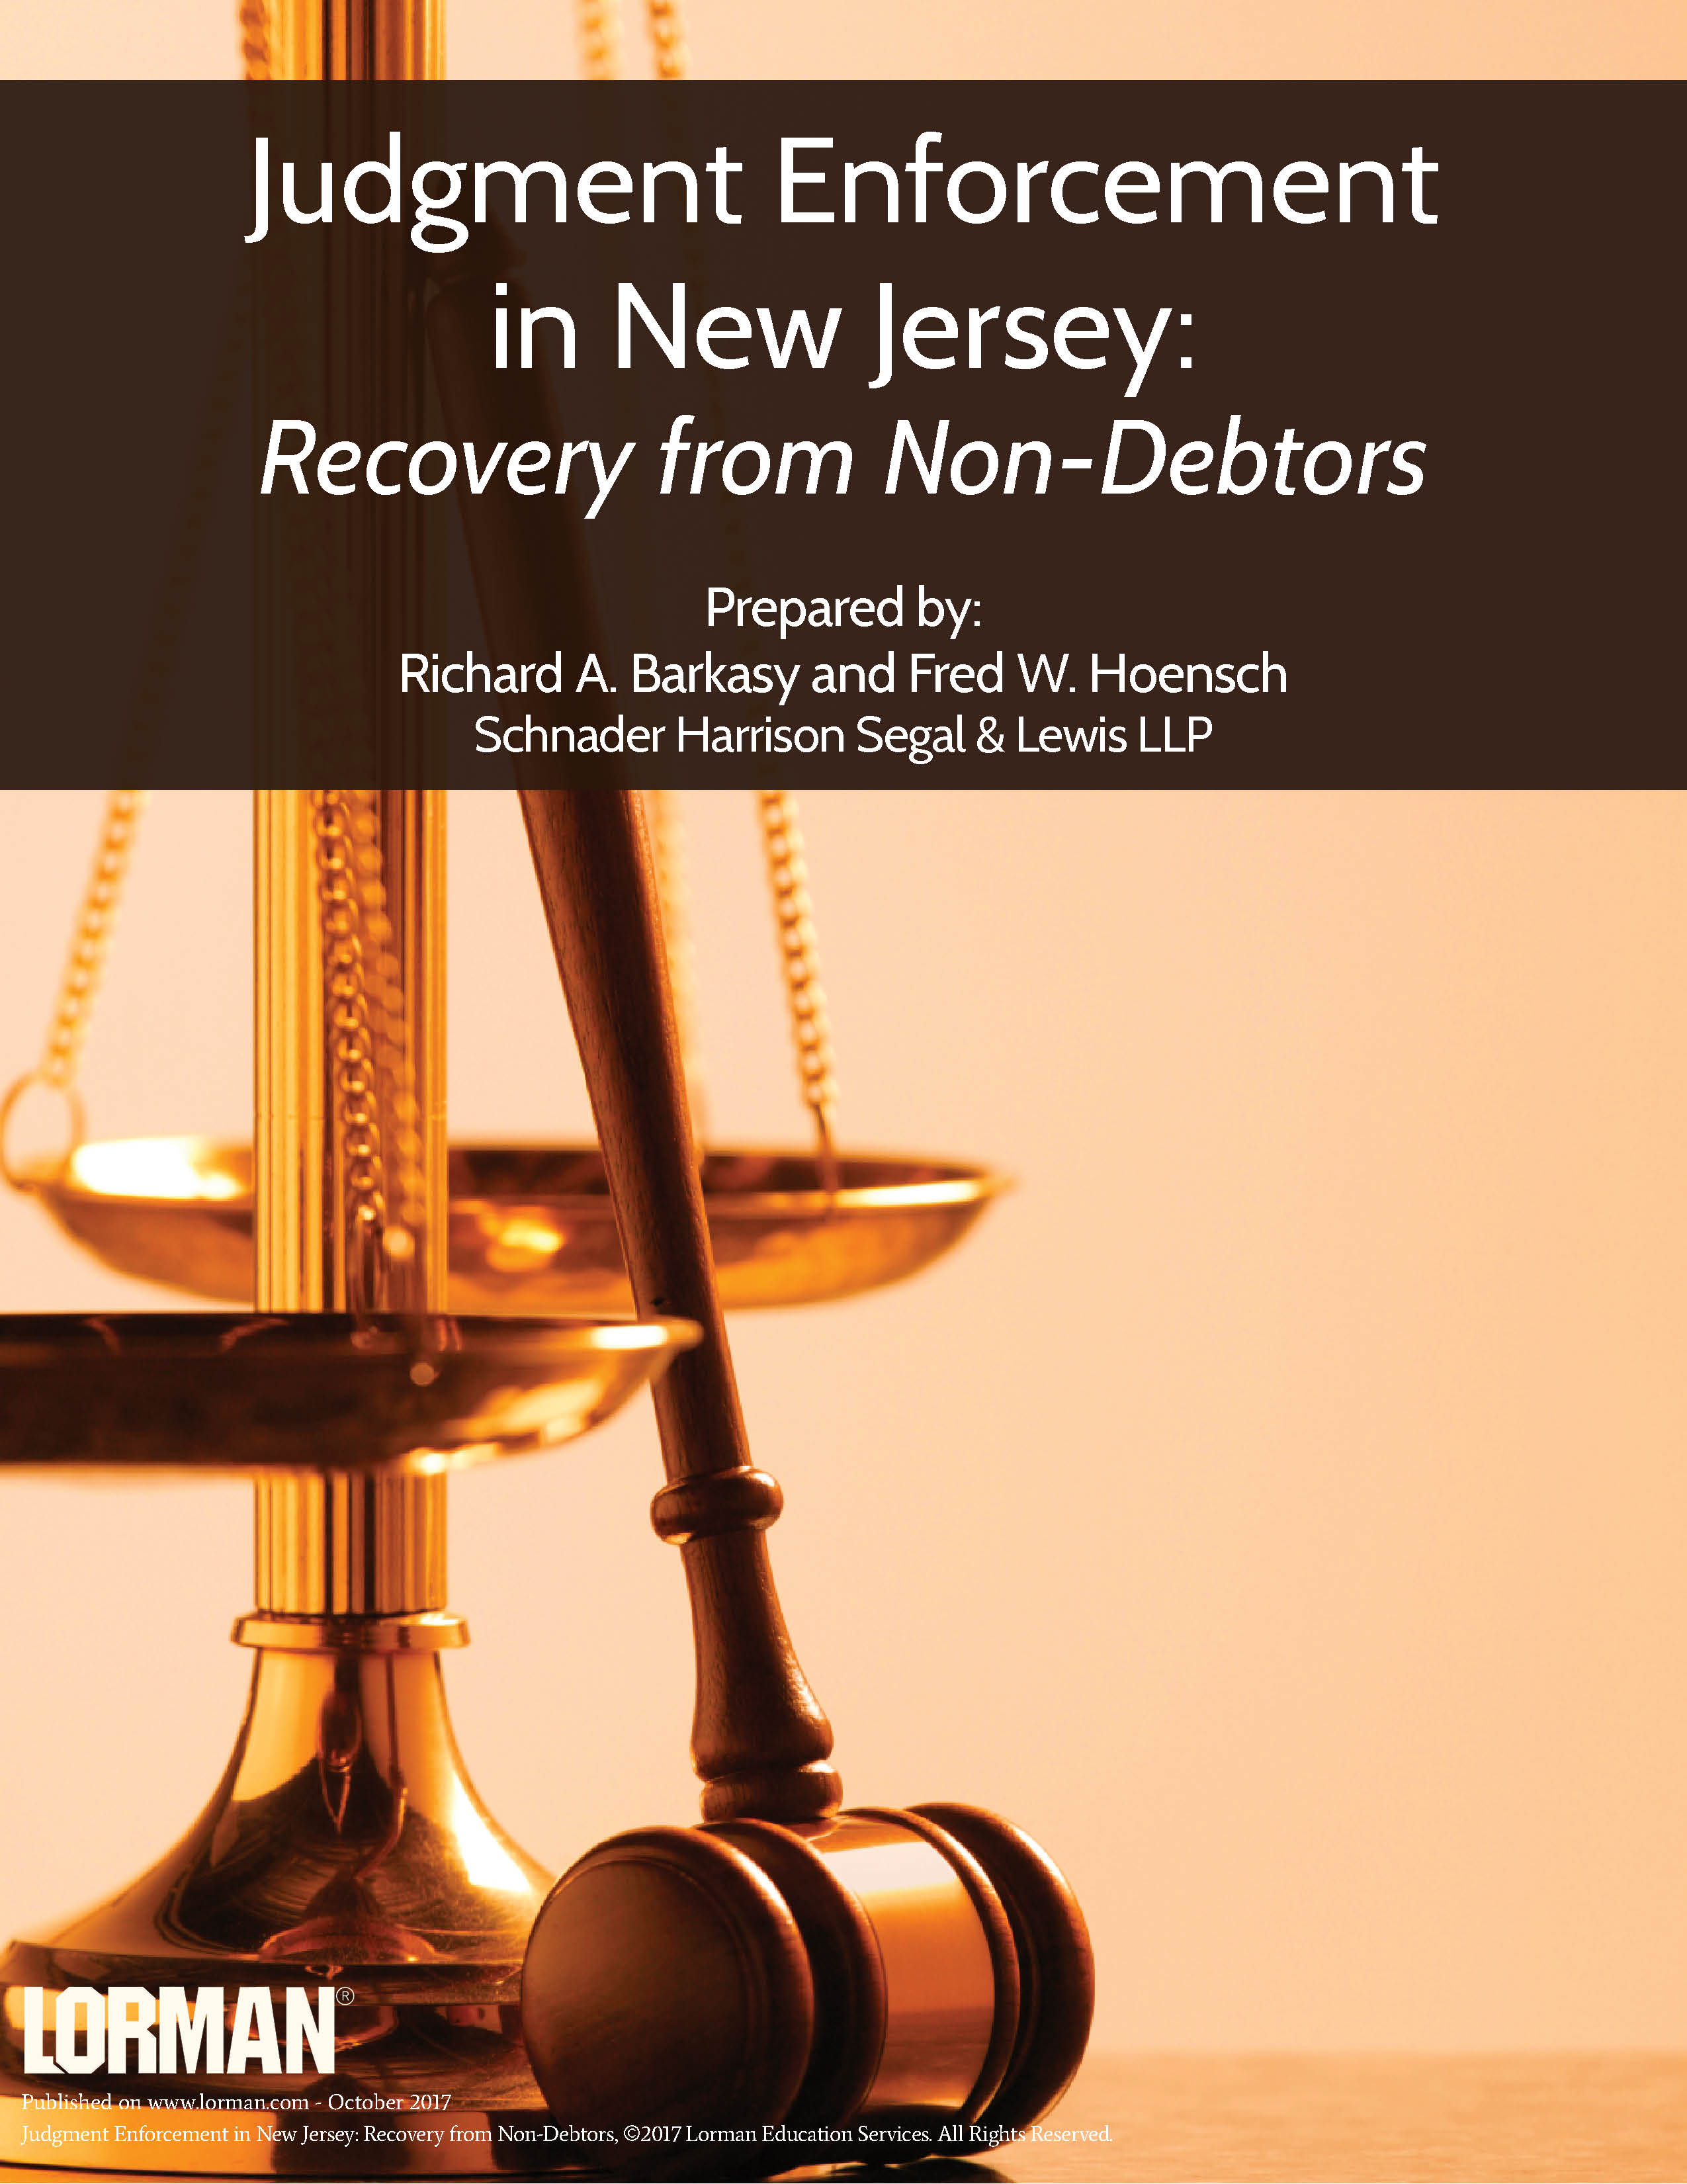 Judgment Enforcement in New Jersey: Recovery from Non-Debtors